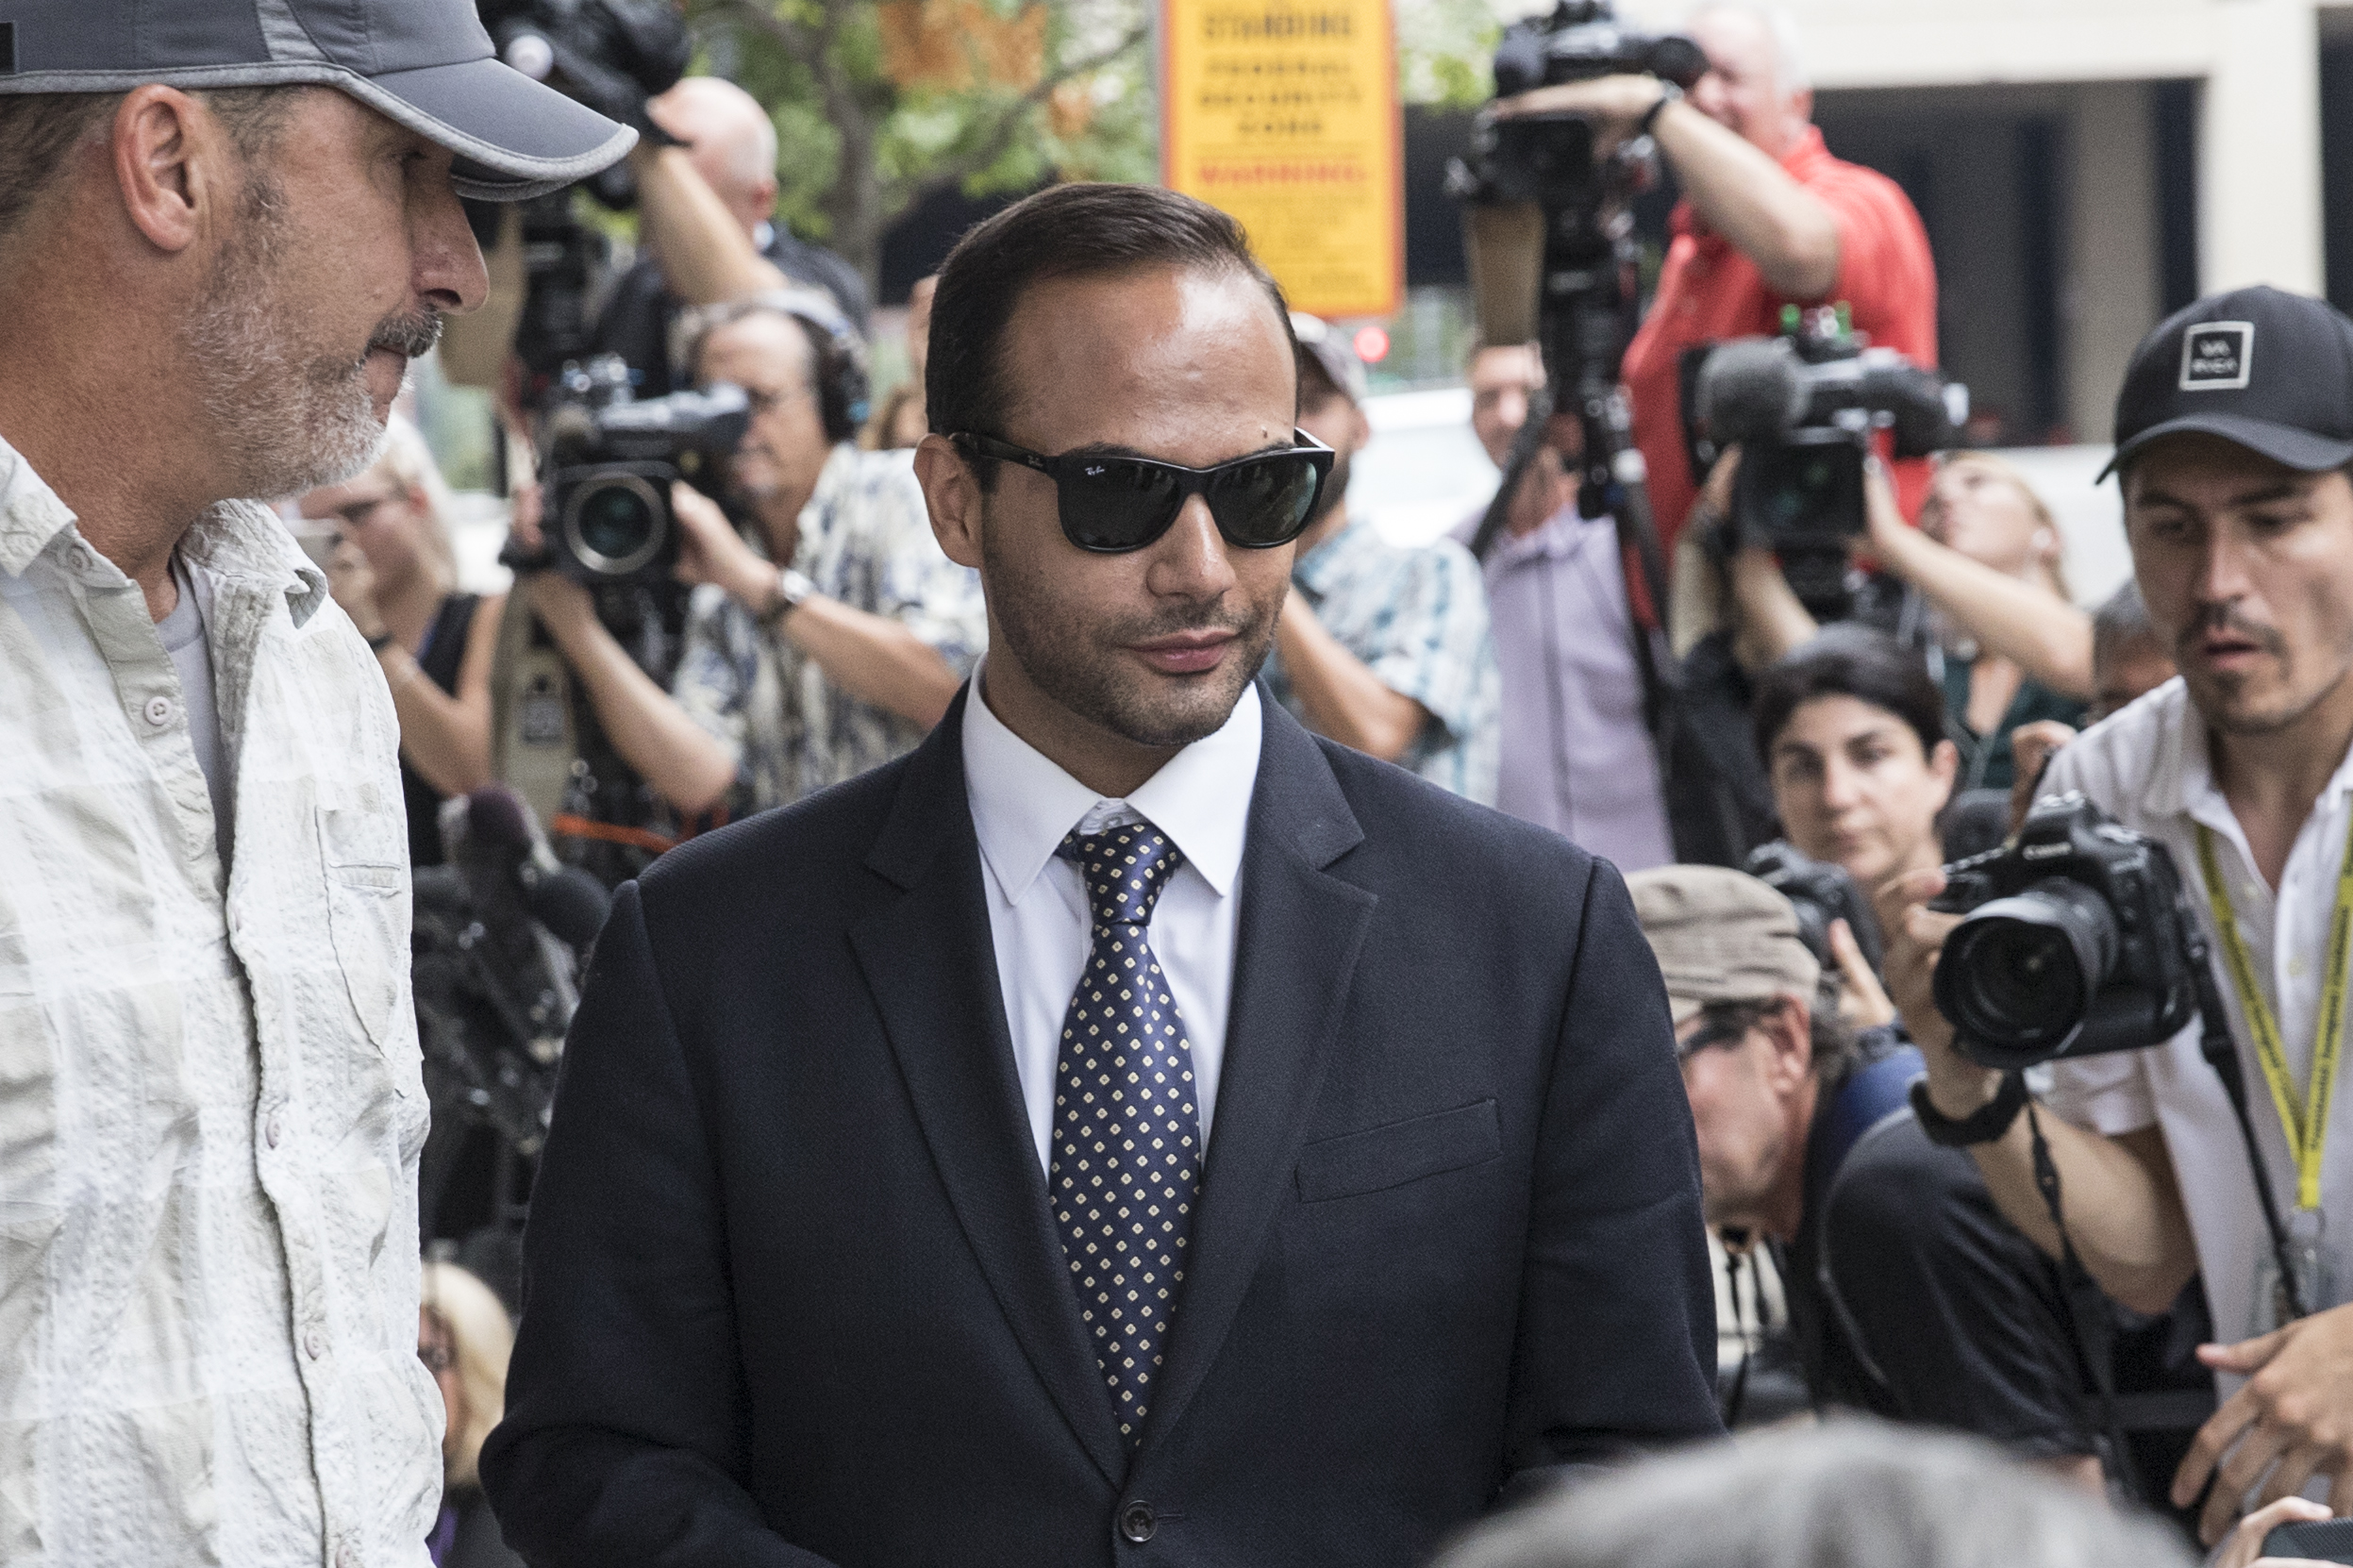 PHOTO: Former Trump Campaign aide George Papadopoulos leaves the U.S. District Court after his sentencing hearing, Sept. 7, 2018, in Washington, D.C. 